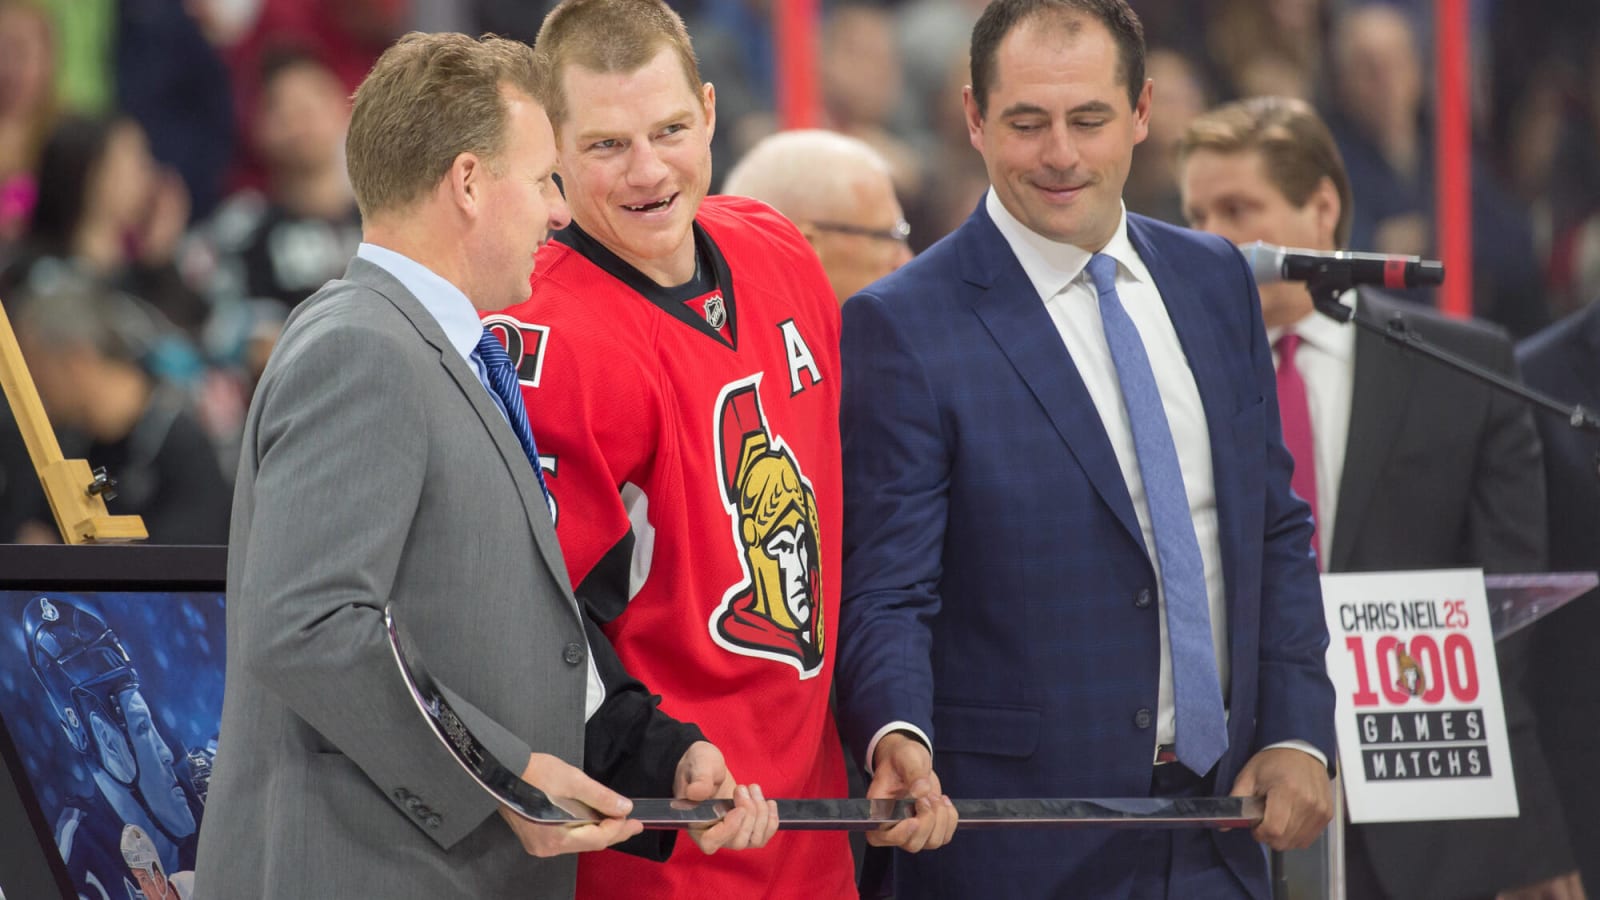 Chris Neil’s number to the Ottawa Senators' rafters, yay or nay?